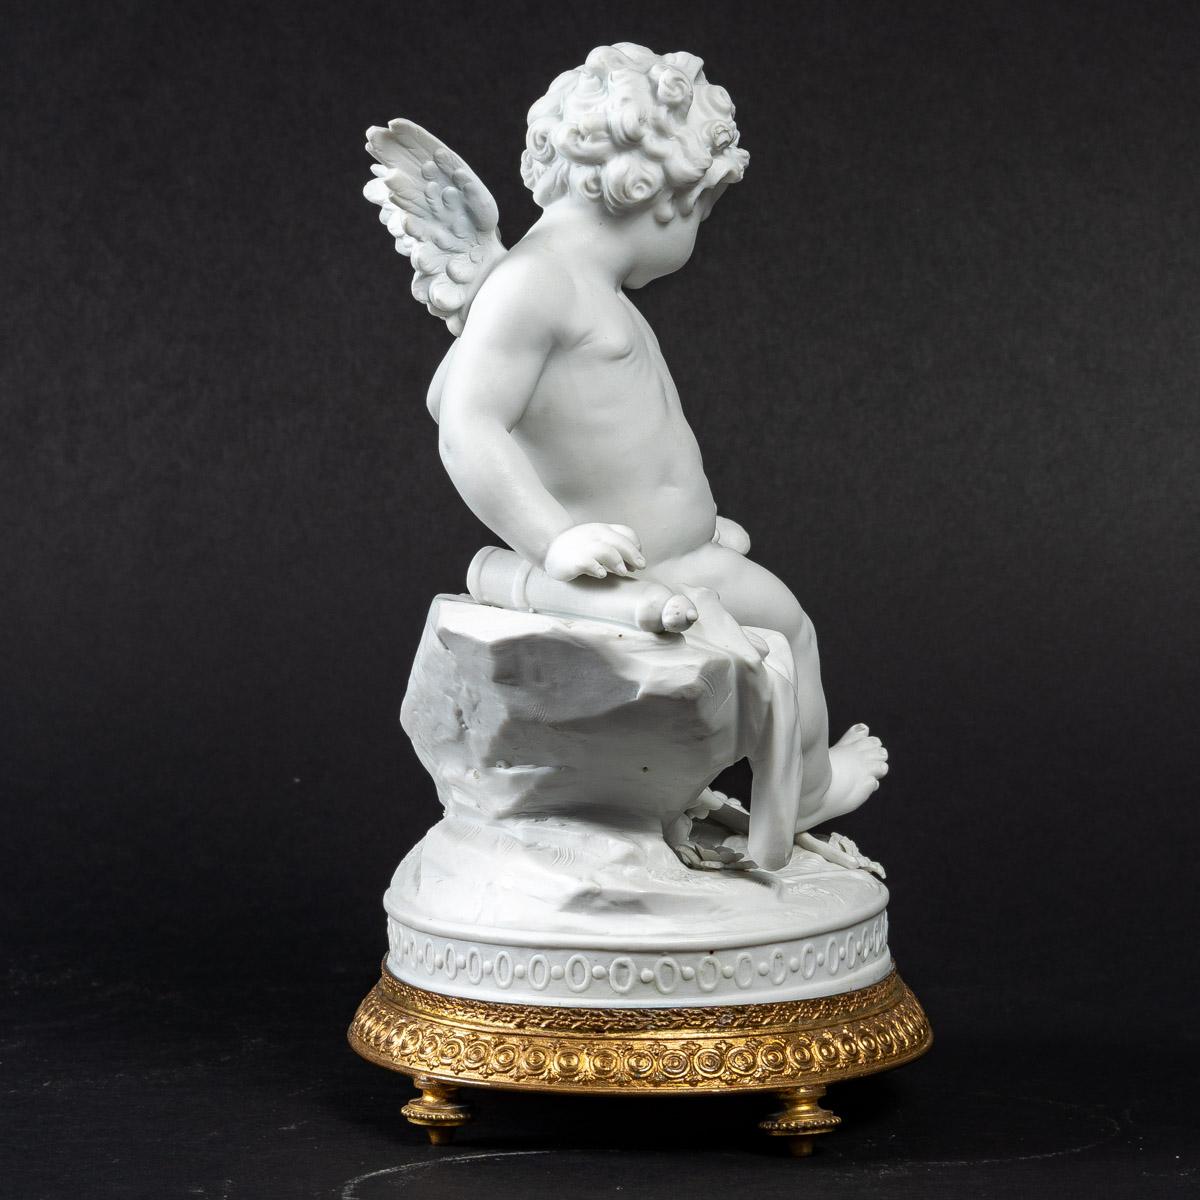 Small angel with birds in biscuit, end of the 19th century
Small biscuit group on a gilded brass base, mark 